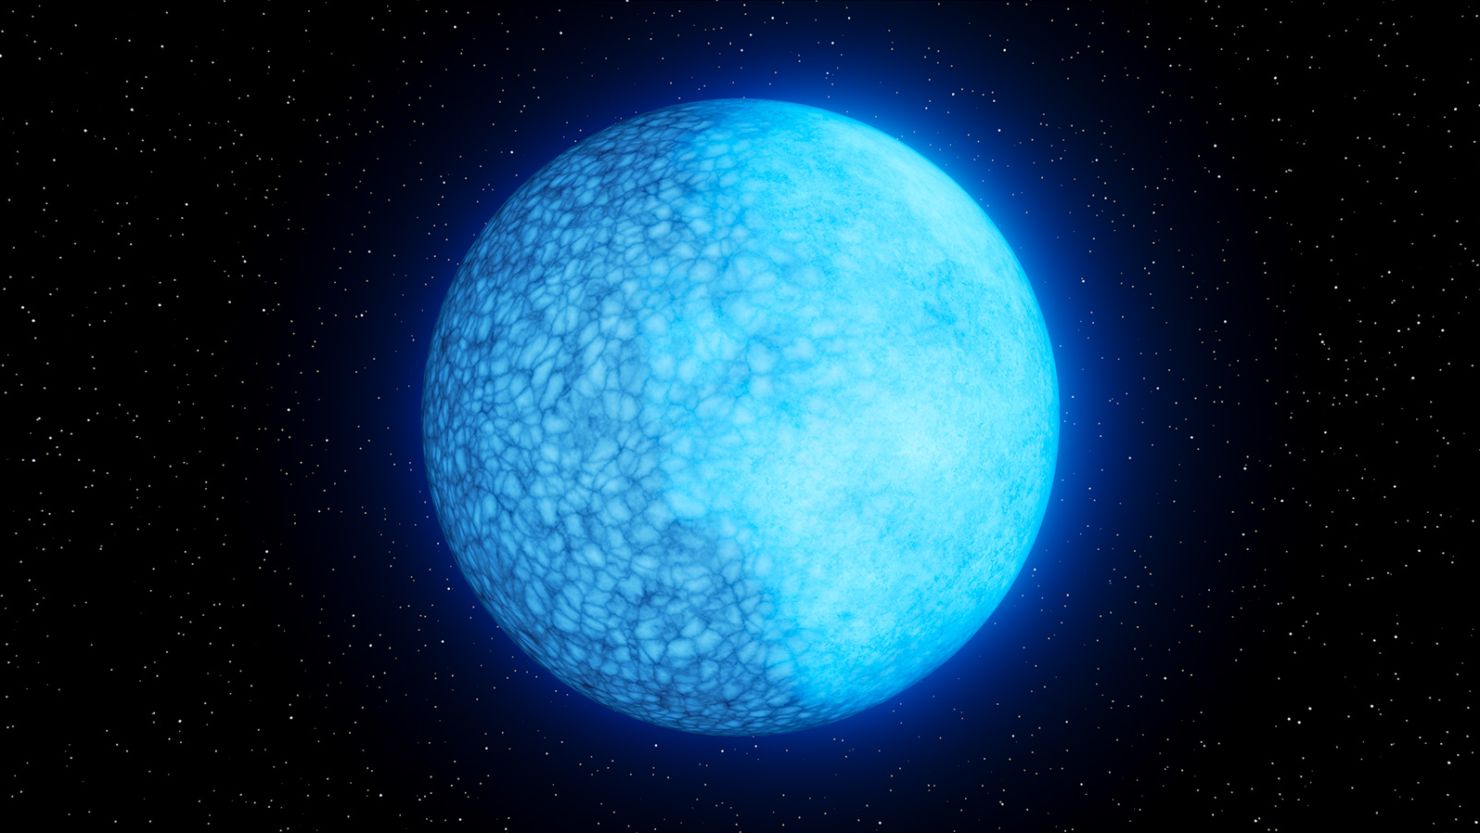 The blue-tinted dead cinder of a star, which was once a star like our sun, is composed primarily of hydrogen on one side and helium on the other (the hydrogen side appears brighter).